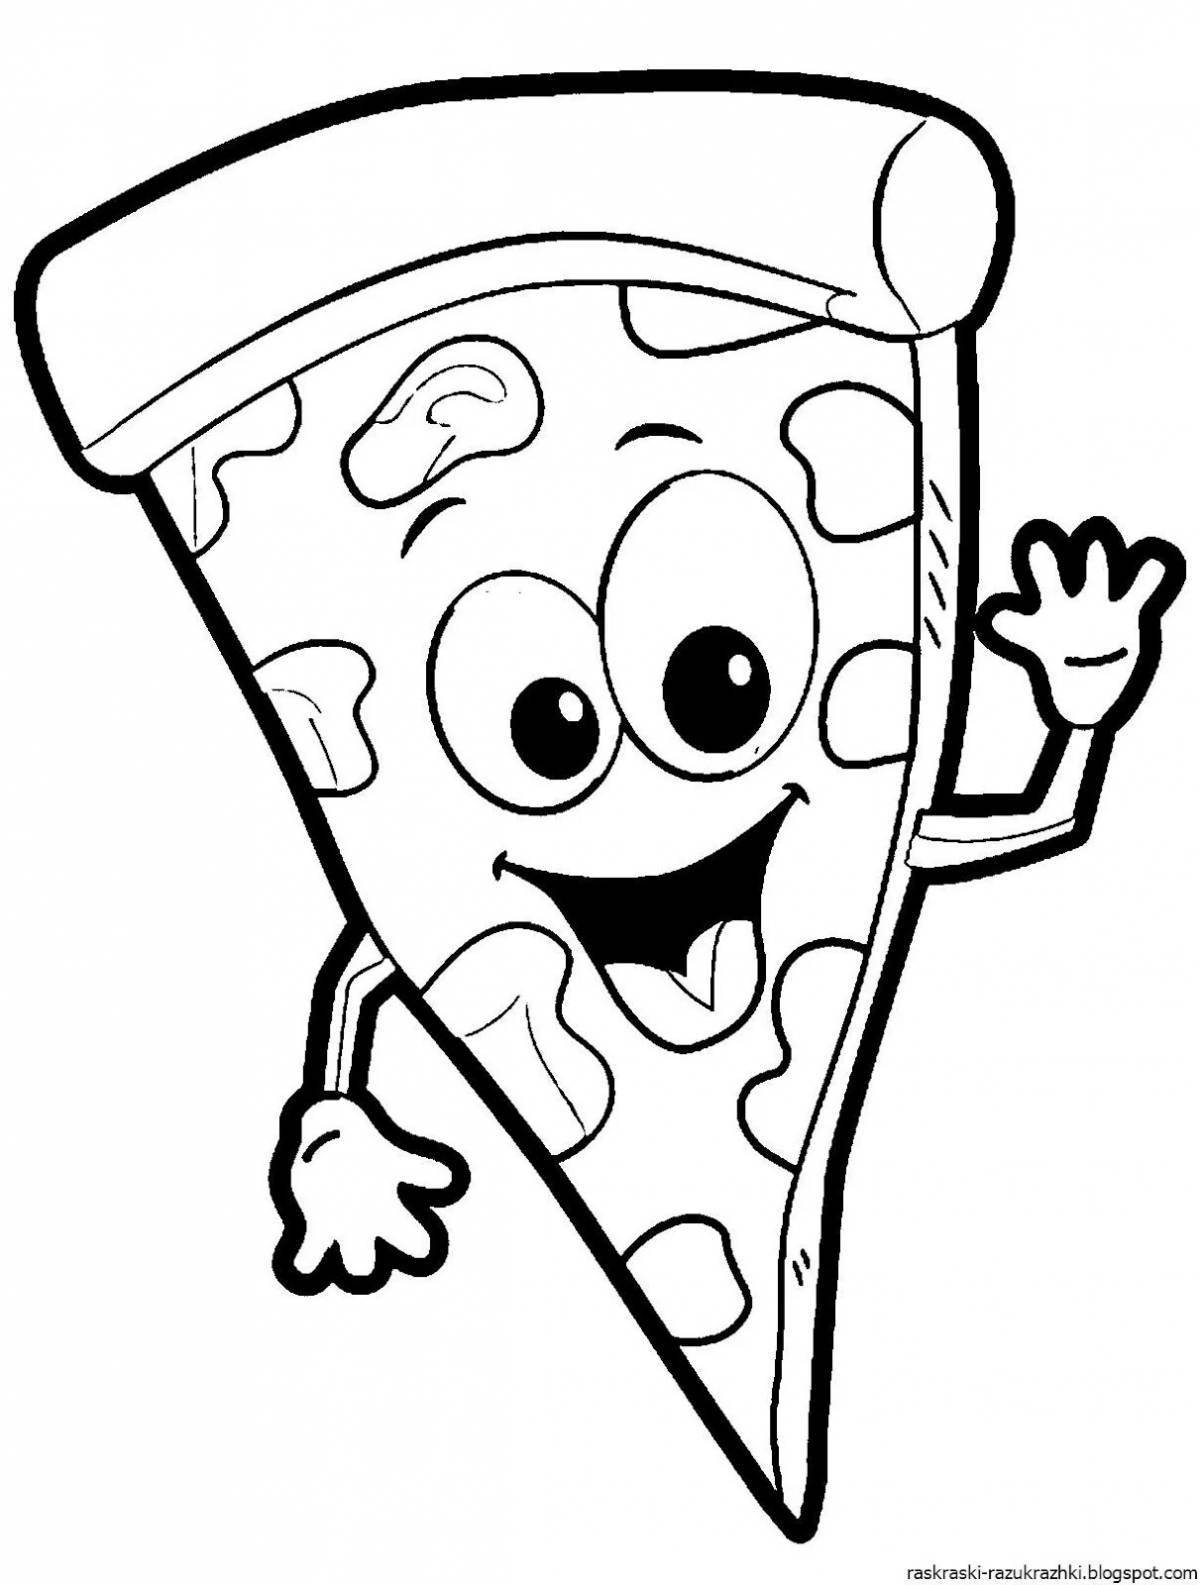 Refreshing pizzeria coloring page